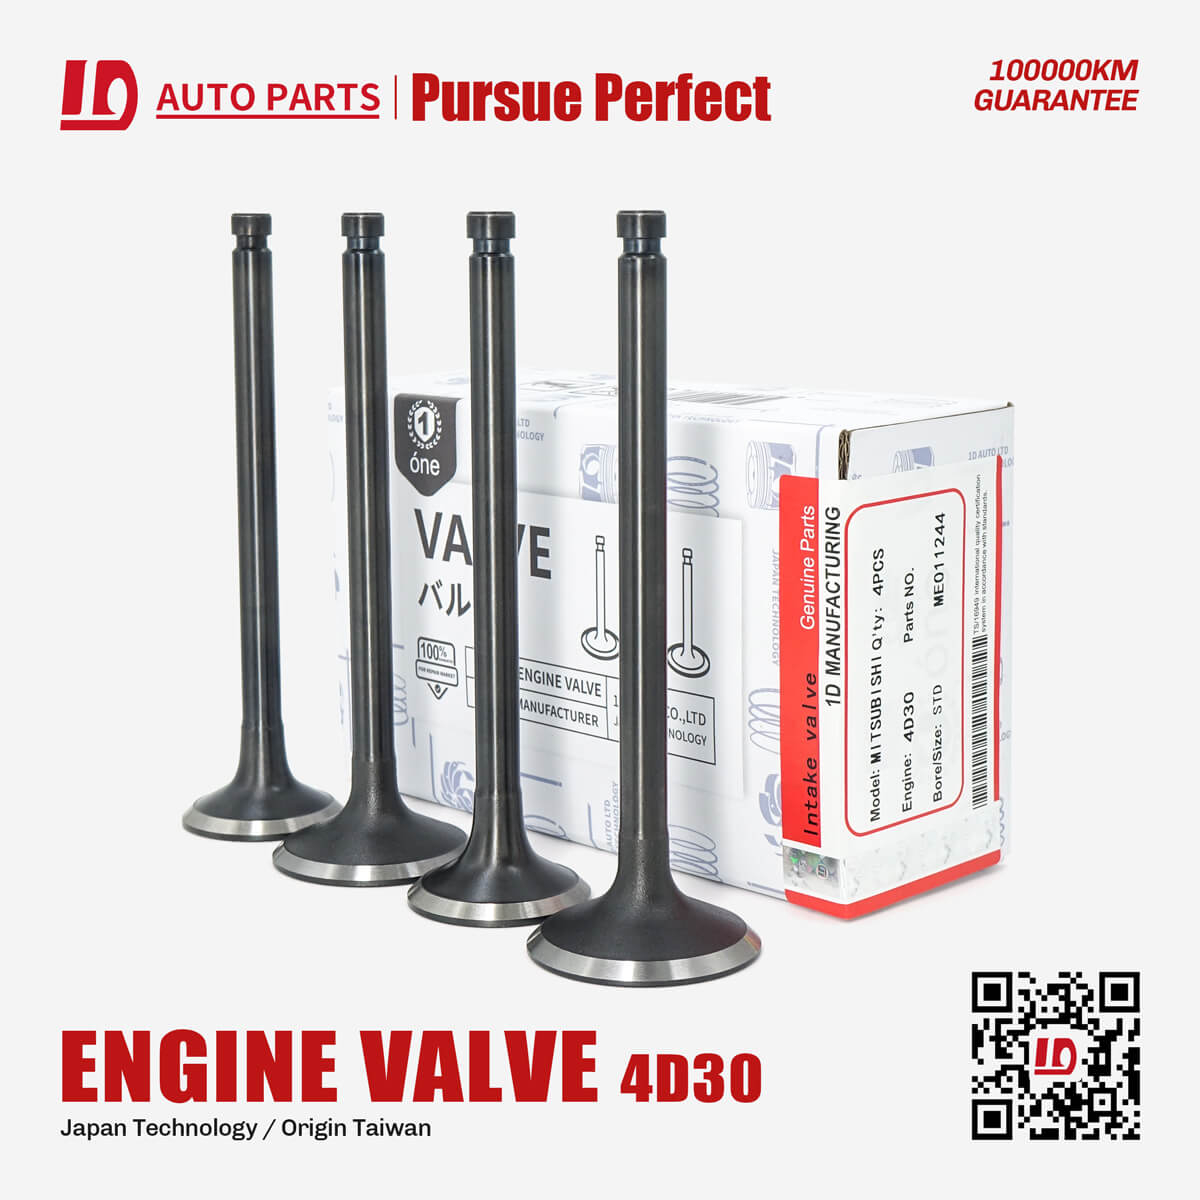 Engine valves ME011244 intake and ME029007 exhaust valves For engine valve 4D30